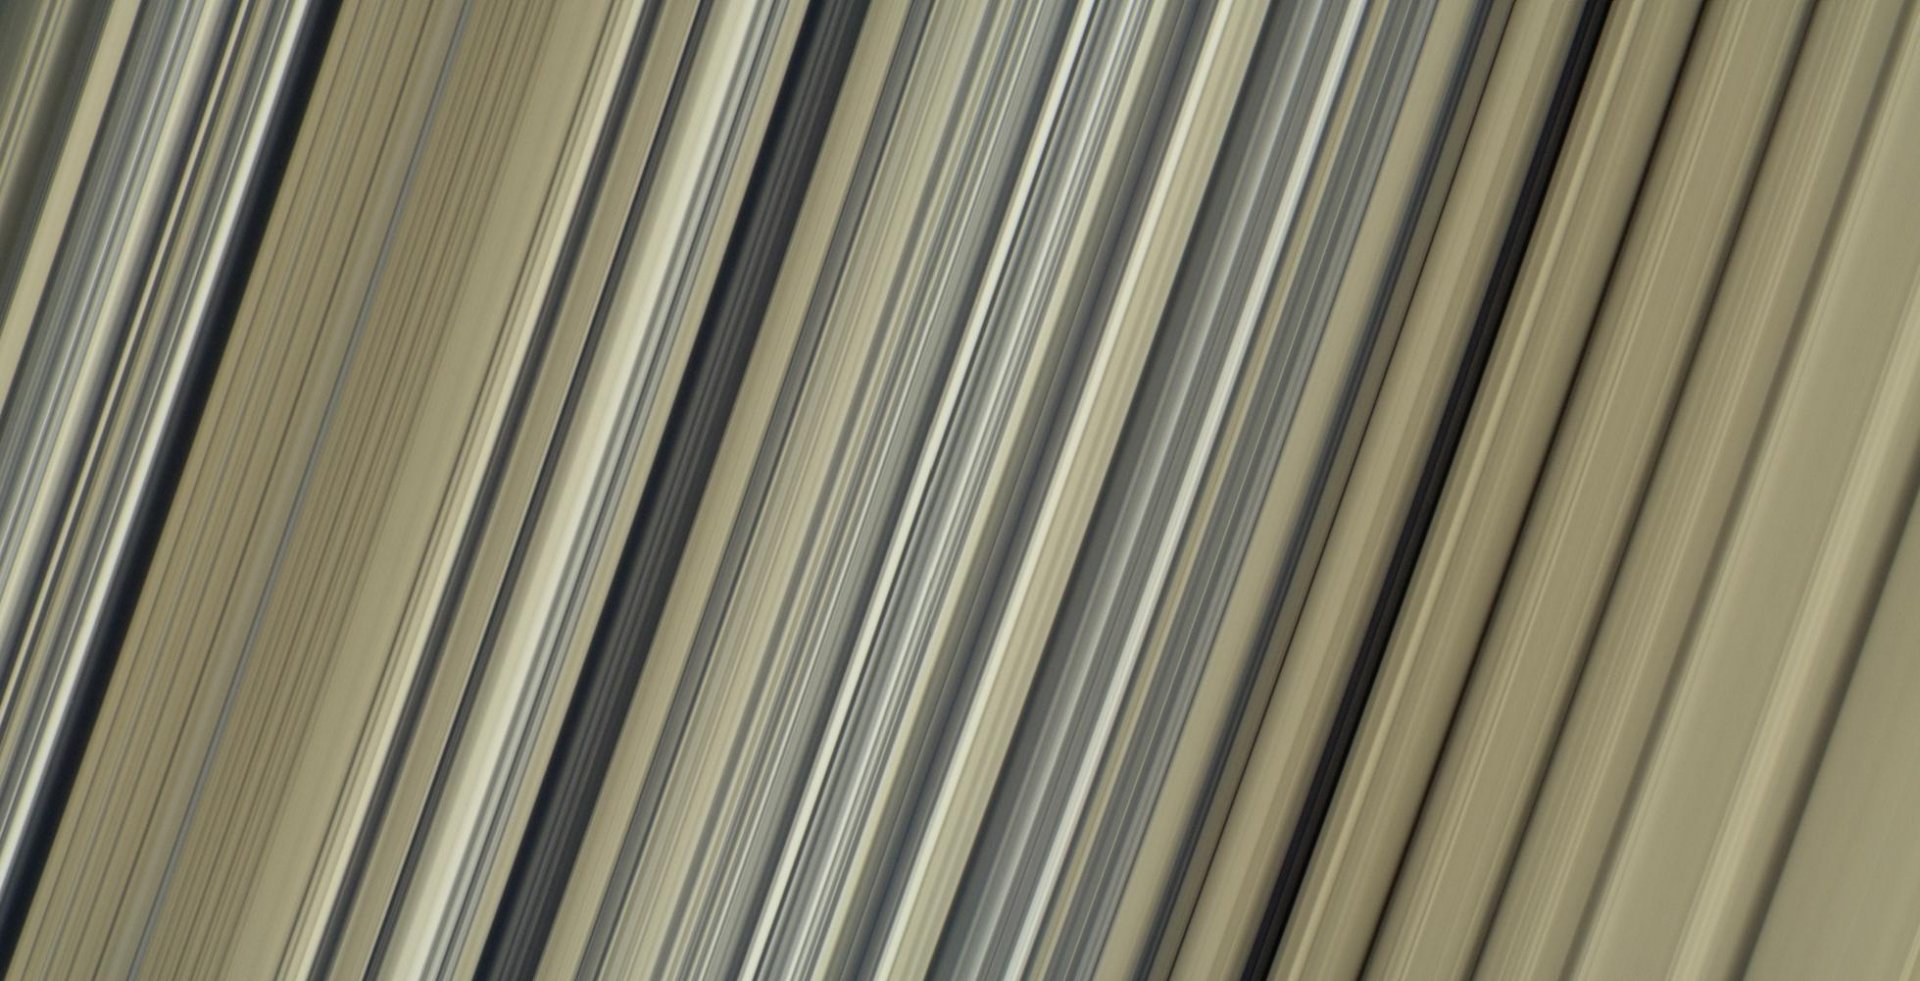 An image nasa took of Saturn's rings which are 98,600 to 105,500 km from Saturn's center). Int...jpg